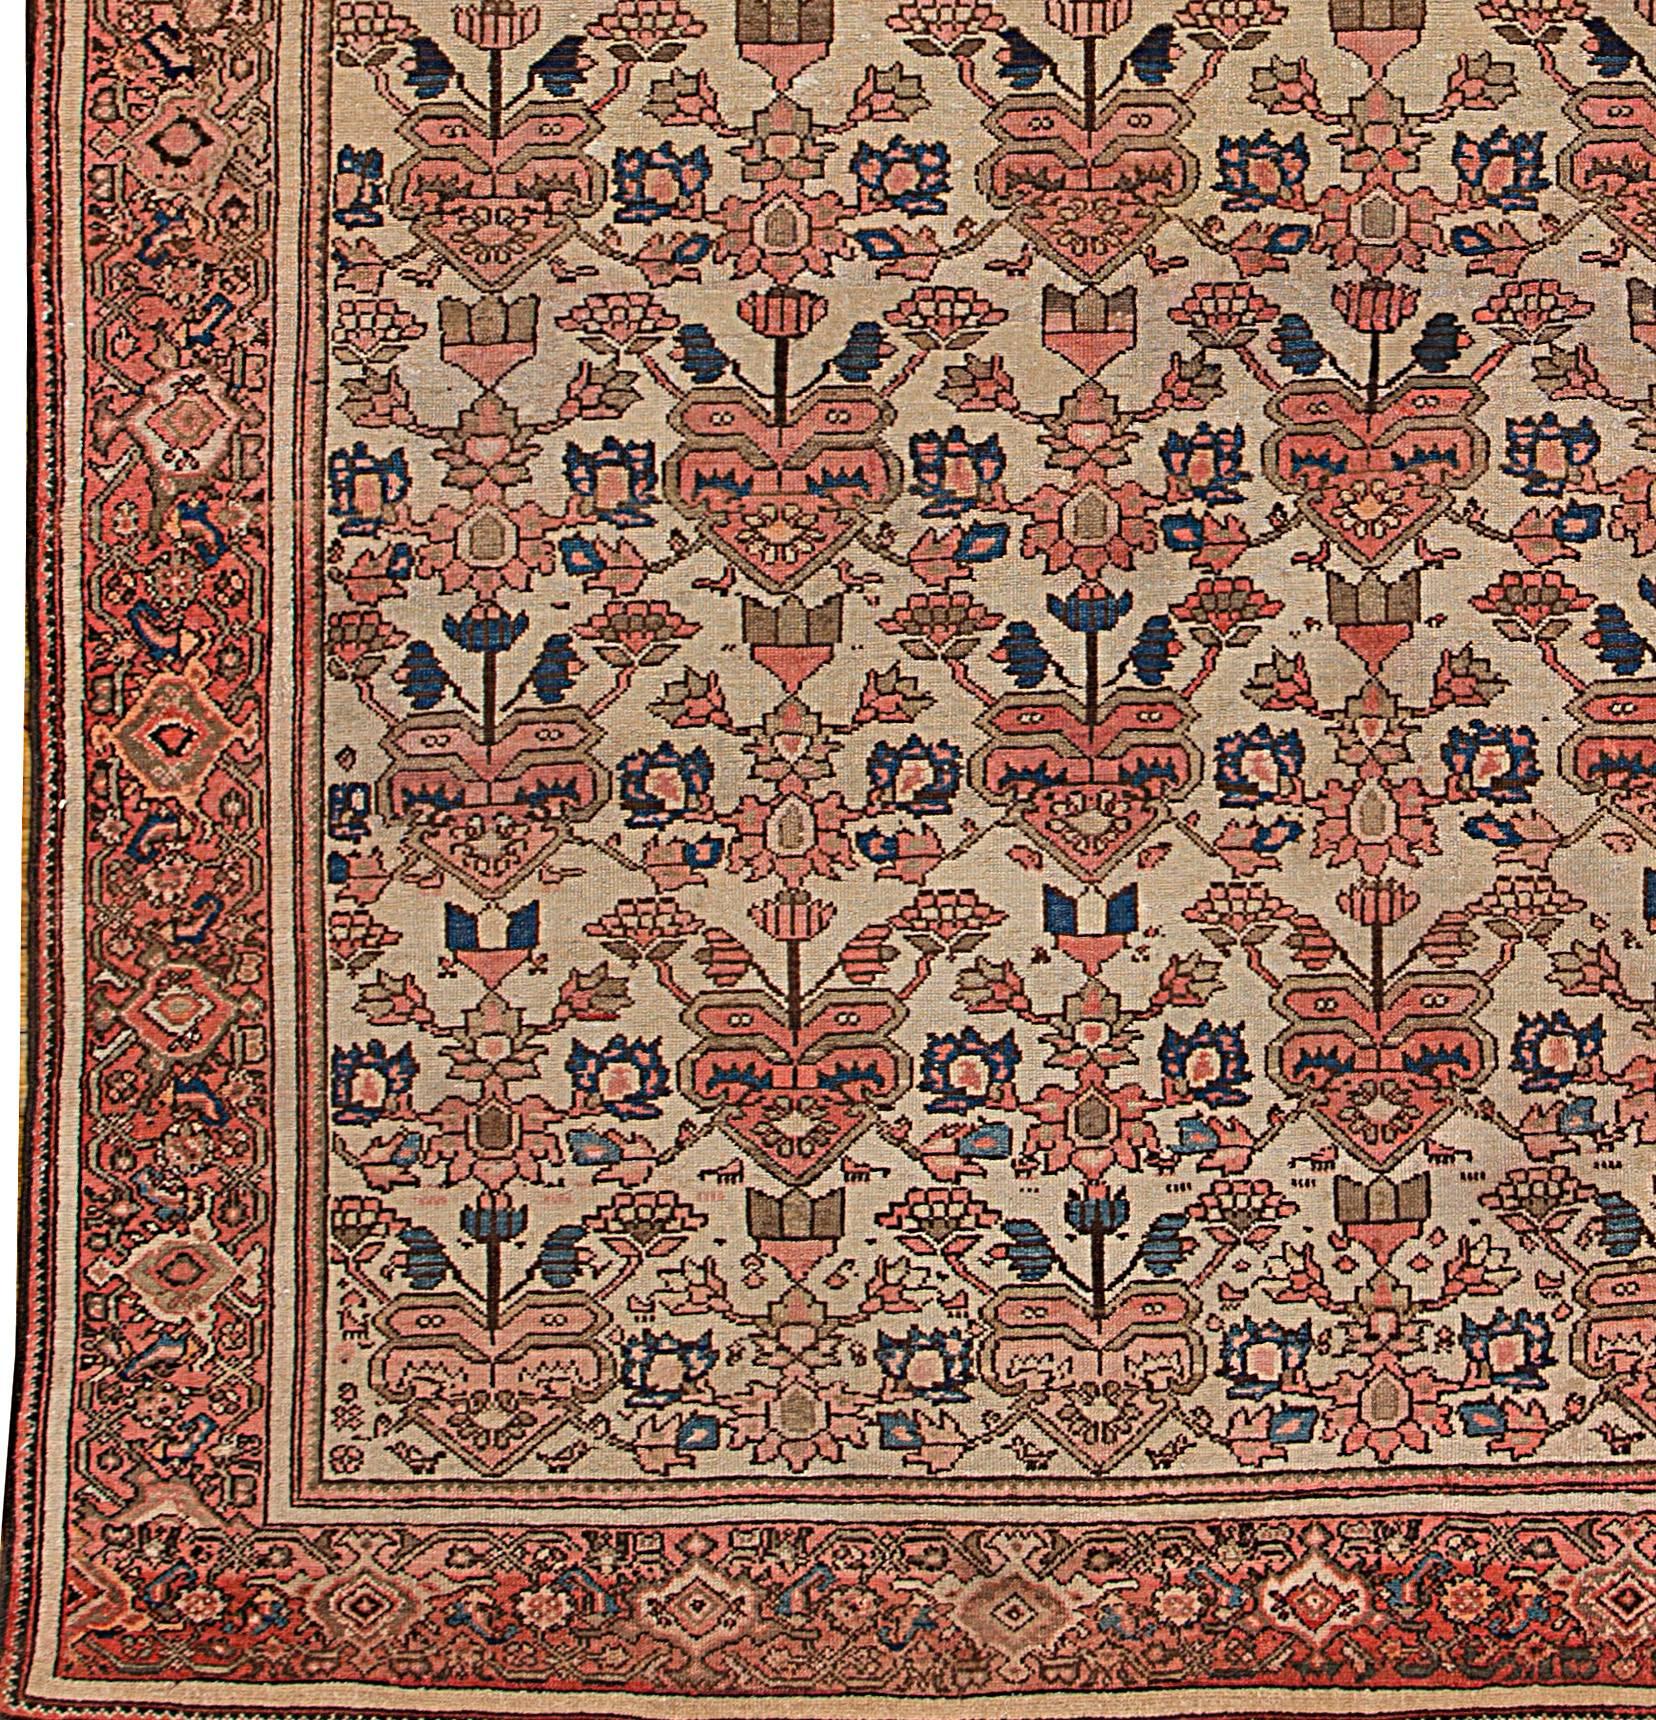 Antique Malayer Persian rug, circa 1890. Hand knotted Malayer rug with all-over pattern, low pile and good patina, circa 1890. Size: 4'3 x 6'2.